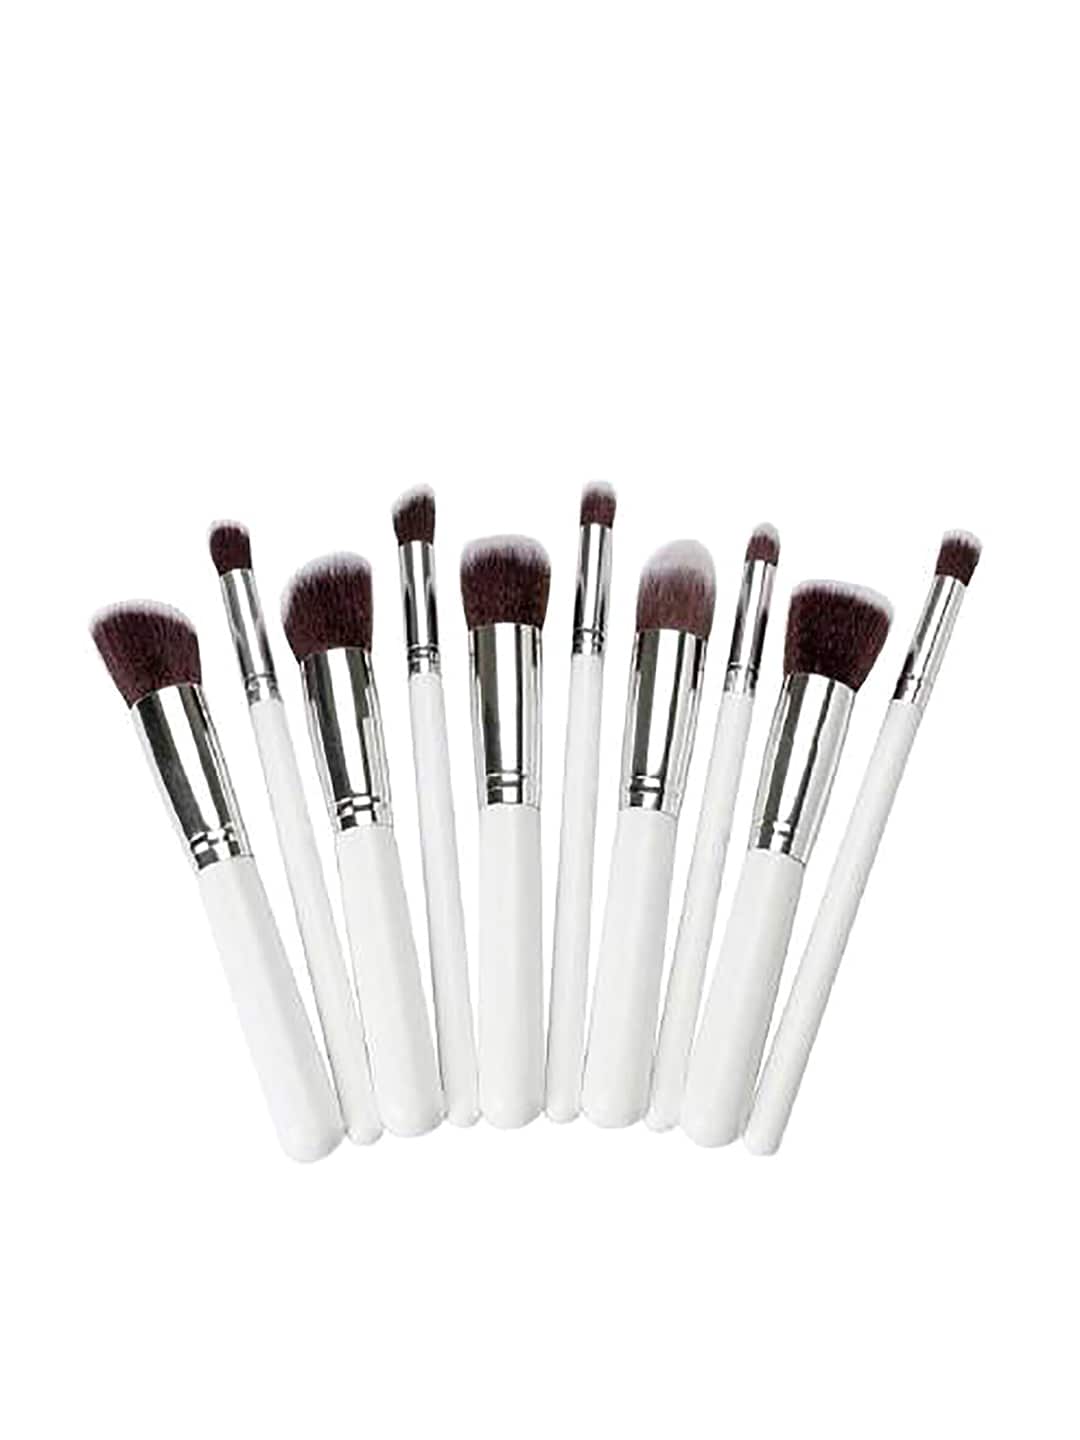 Ronzille Set of 10 White Soft Makeup Brushes Price in India